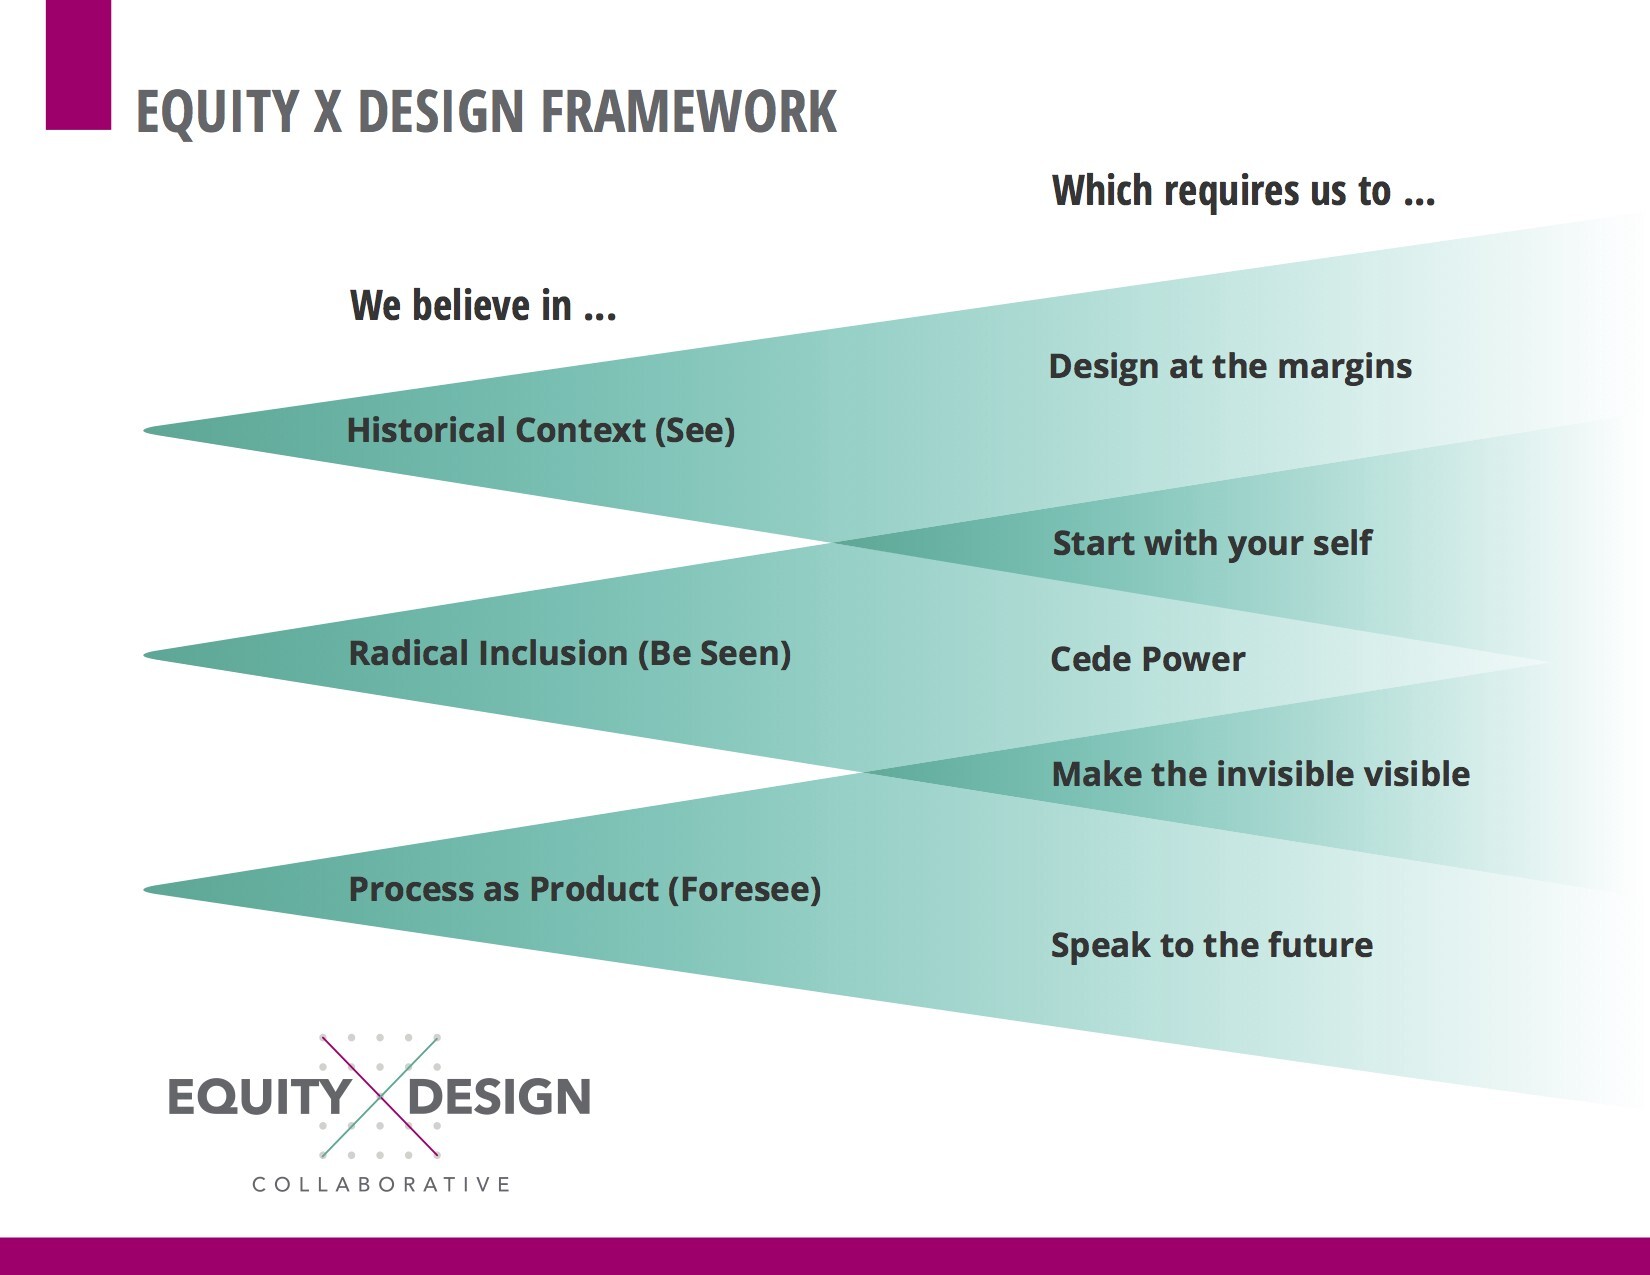 the Equity X Design framework of we believes in vs which requires us to